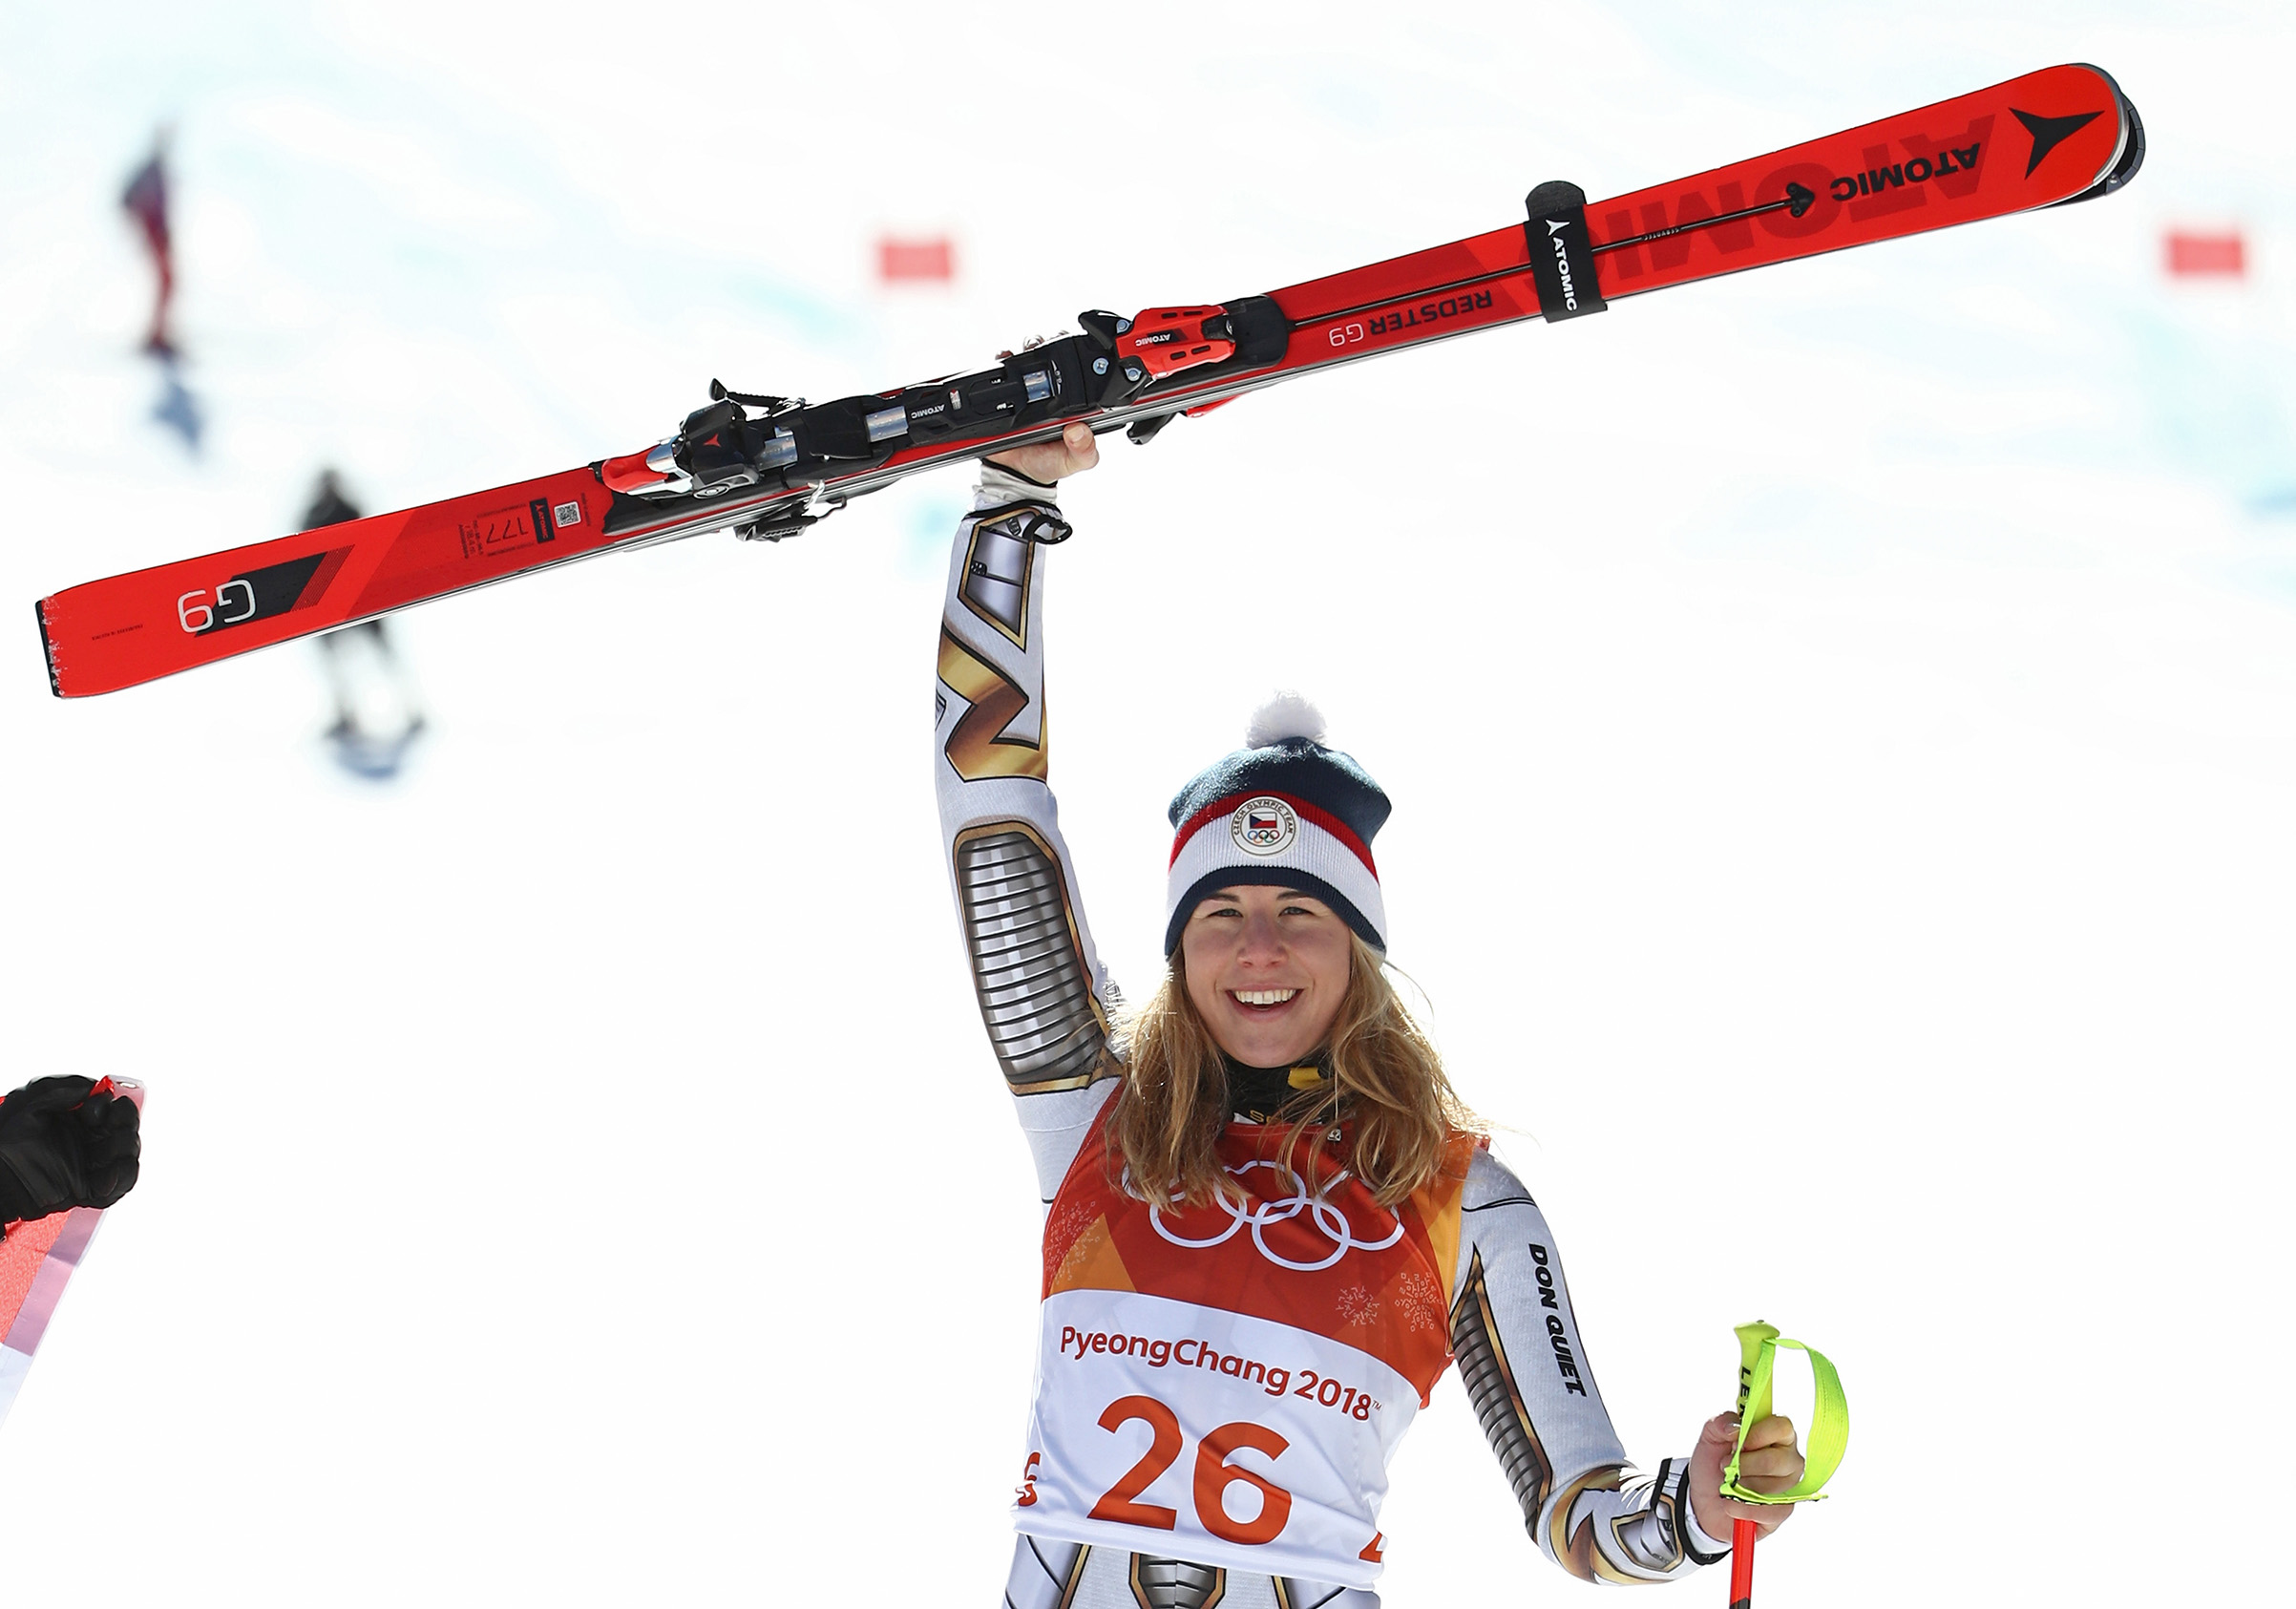 Gold medallist Ester Ledecka of the Czech Republic celebrates during the victory ceremony for the Alpine Skiing Ladies Super-G at the PyeongChang 2018 Winter Olympic Games on Feb. 17, 2018. (Ezra Shaw—Getty Images)